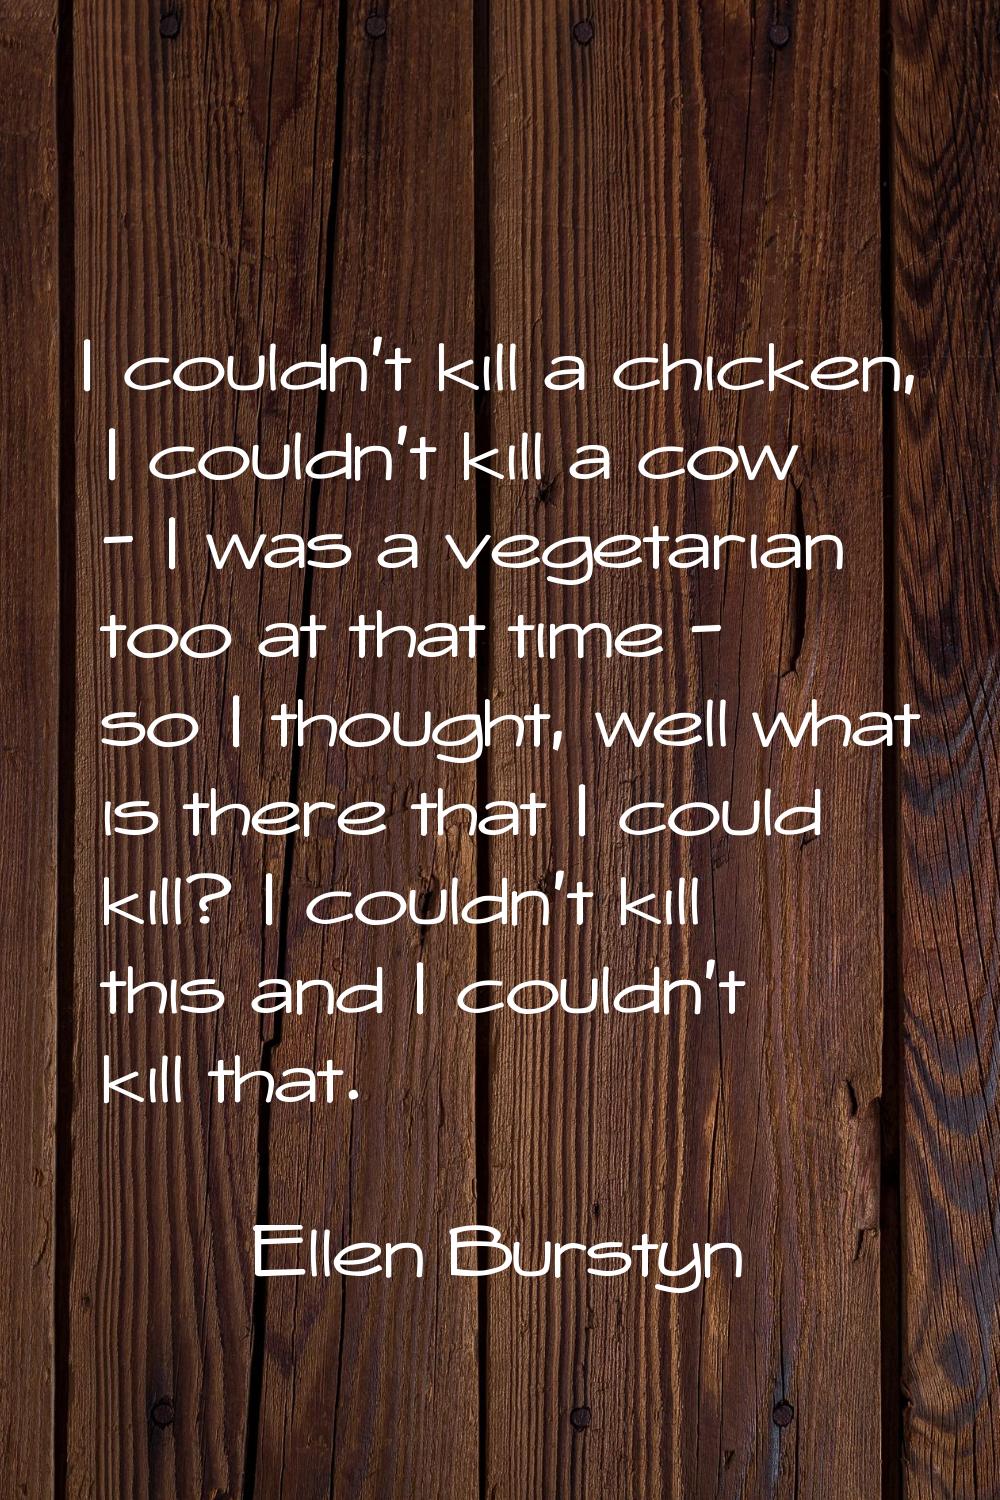 I couldn't kill a chicken, I couldn't kill a cow - I was a vegetarian too at that time - so I thoug